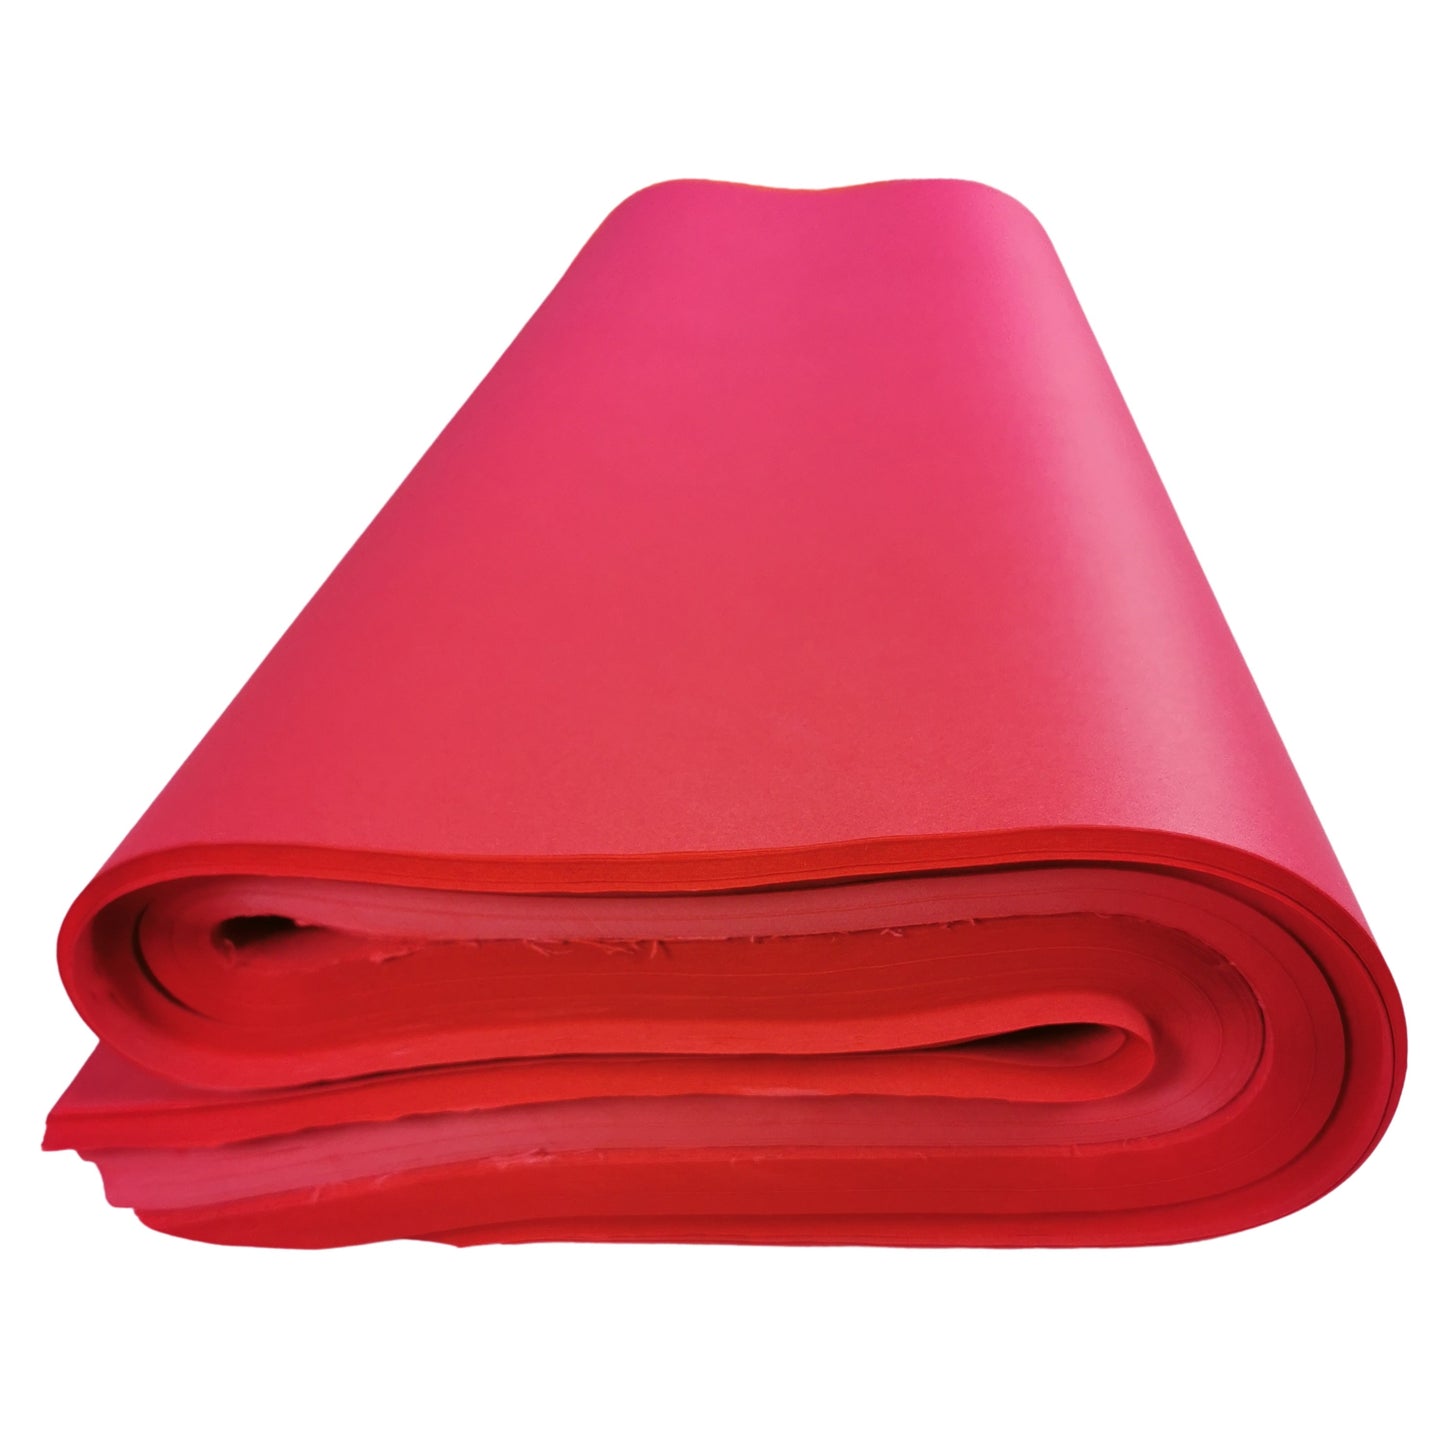 Tissue Paper Sheets 50cm x 75cm 17gsm Red